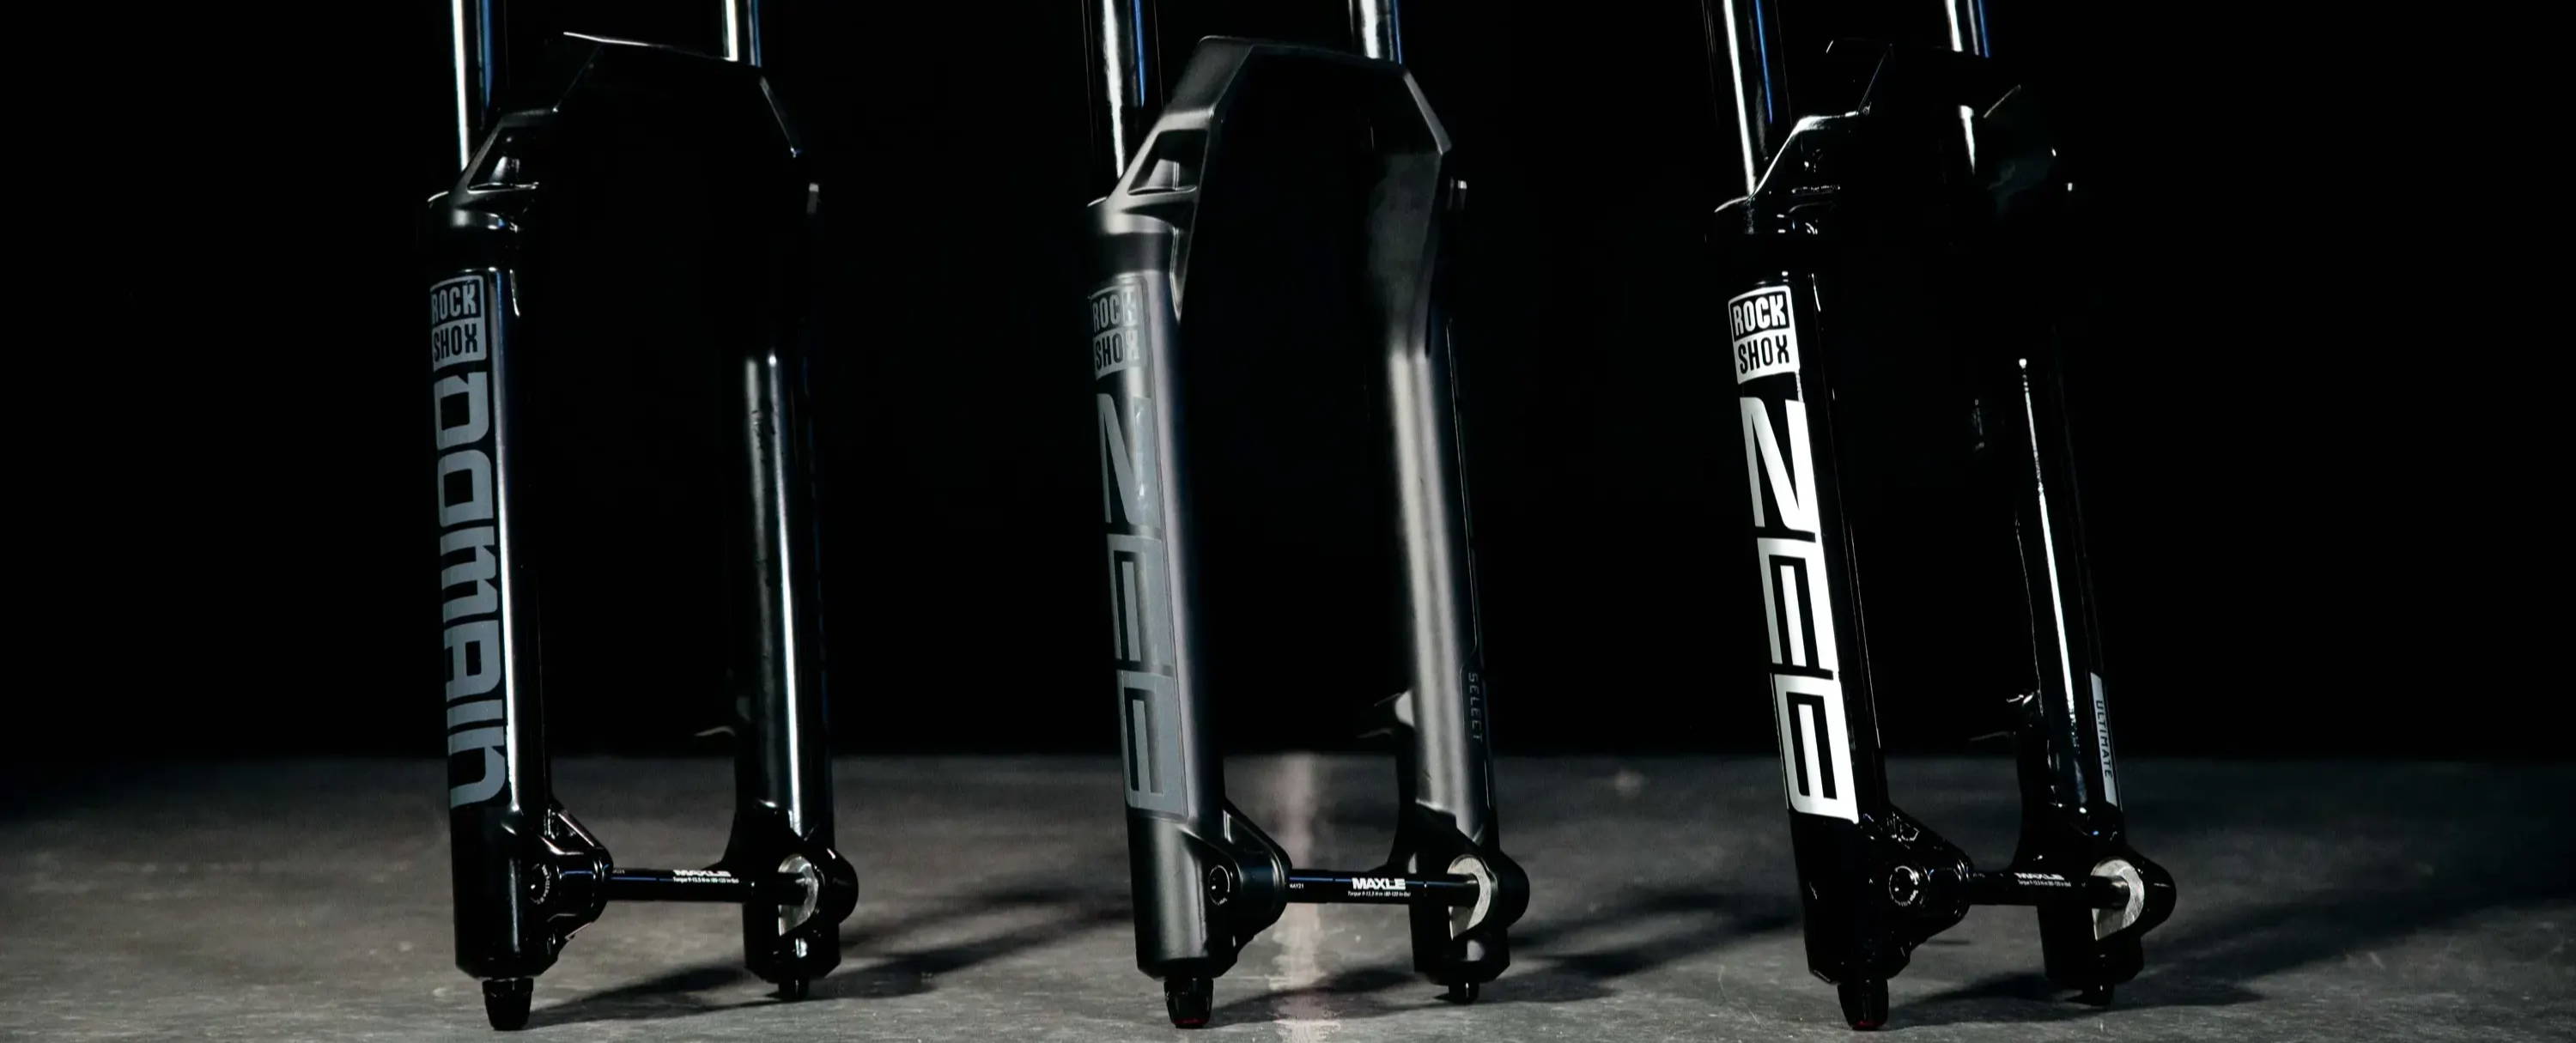 Rockshox domain zeb select and zeb ultimate on a shiny table with a black background